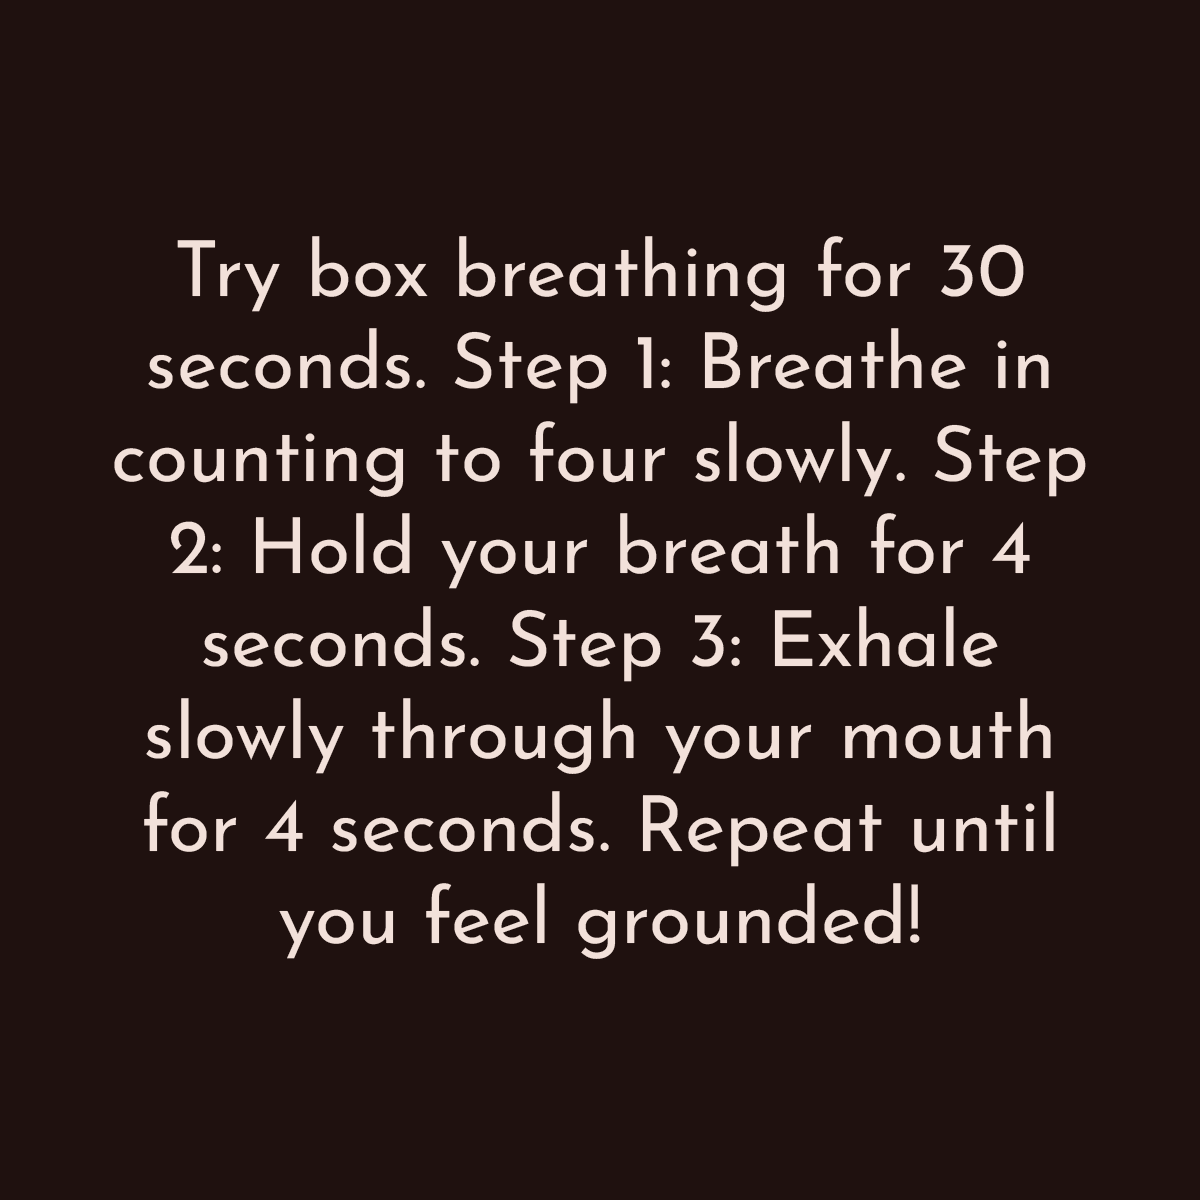 Try box breathing for 30 seconds. Step 1: Breathe in counting to four slowly. Step 2: Hold your breath for 4 seconds. Step 3: Exhale slowly through your mouth for 4 seconds. Repeat until you feel grounded!